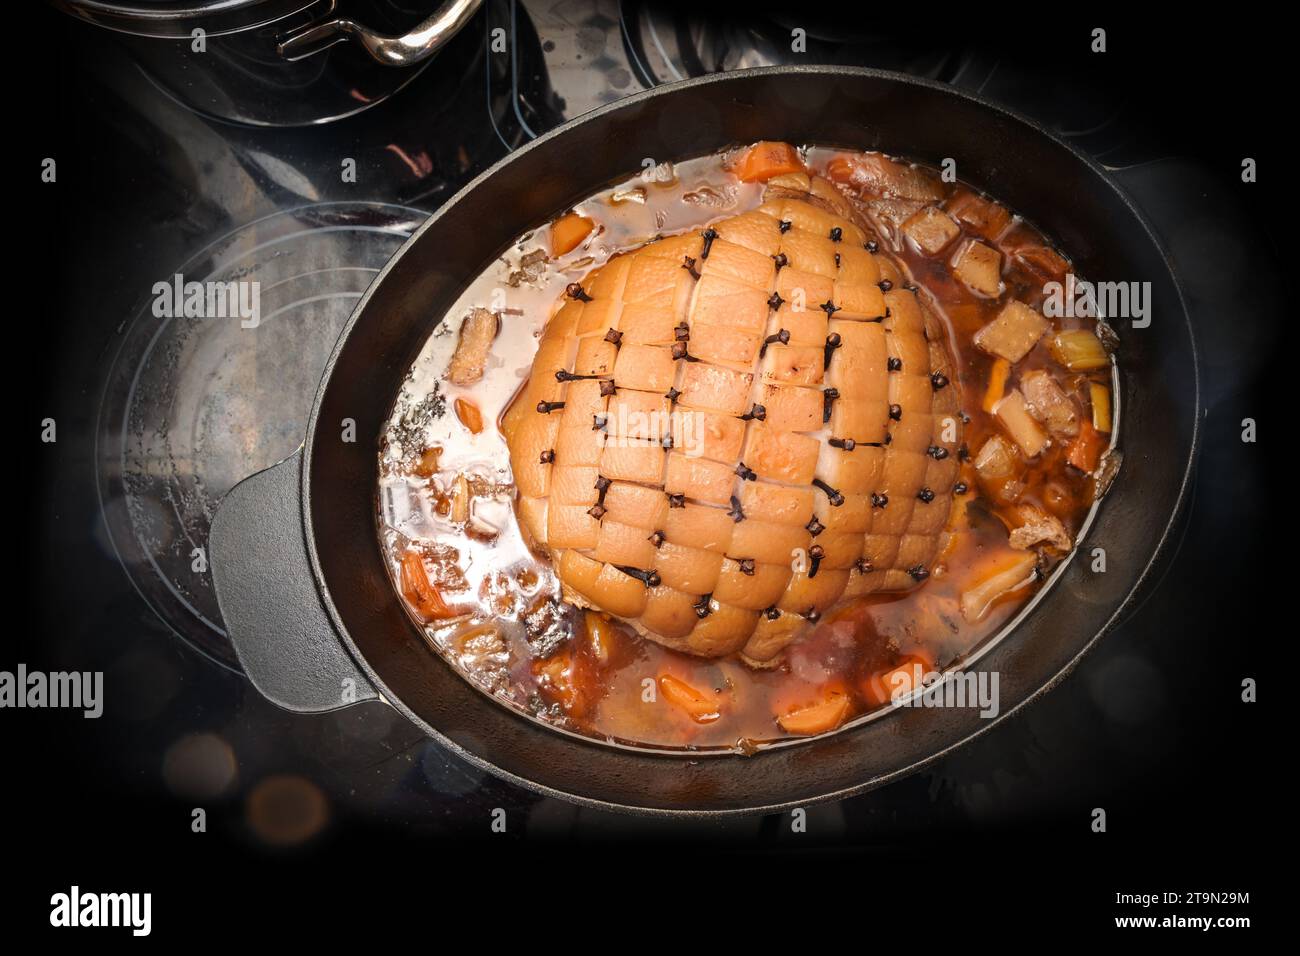 Roast pork with rind in diamond shapes and larded with cloves in a casserole with vegetables and broth on a black stove top, cooking a festive meal, h Stock Photo